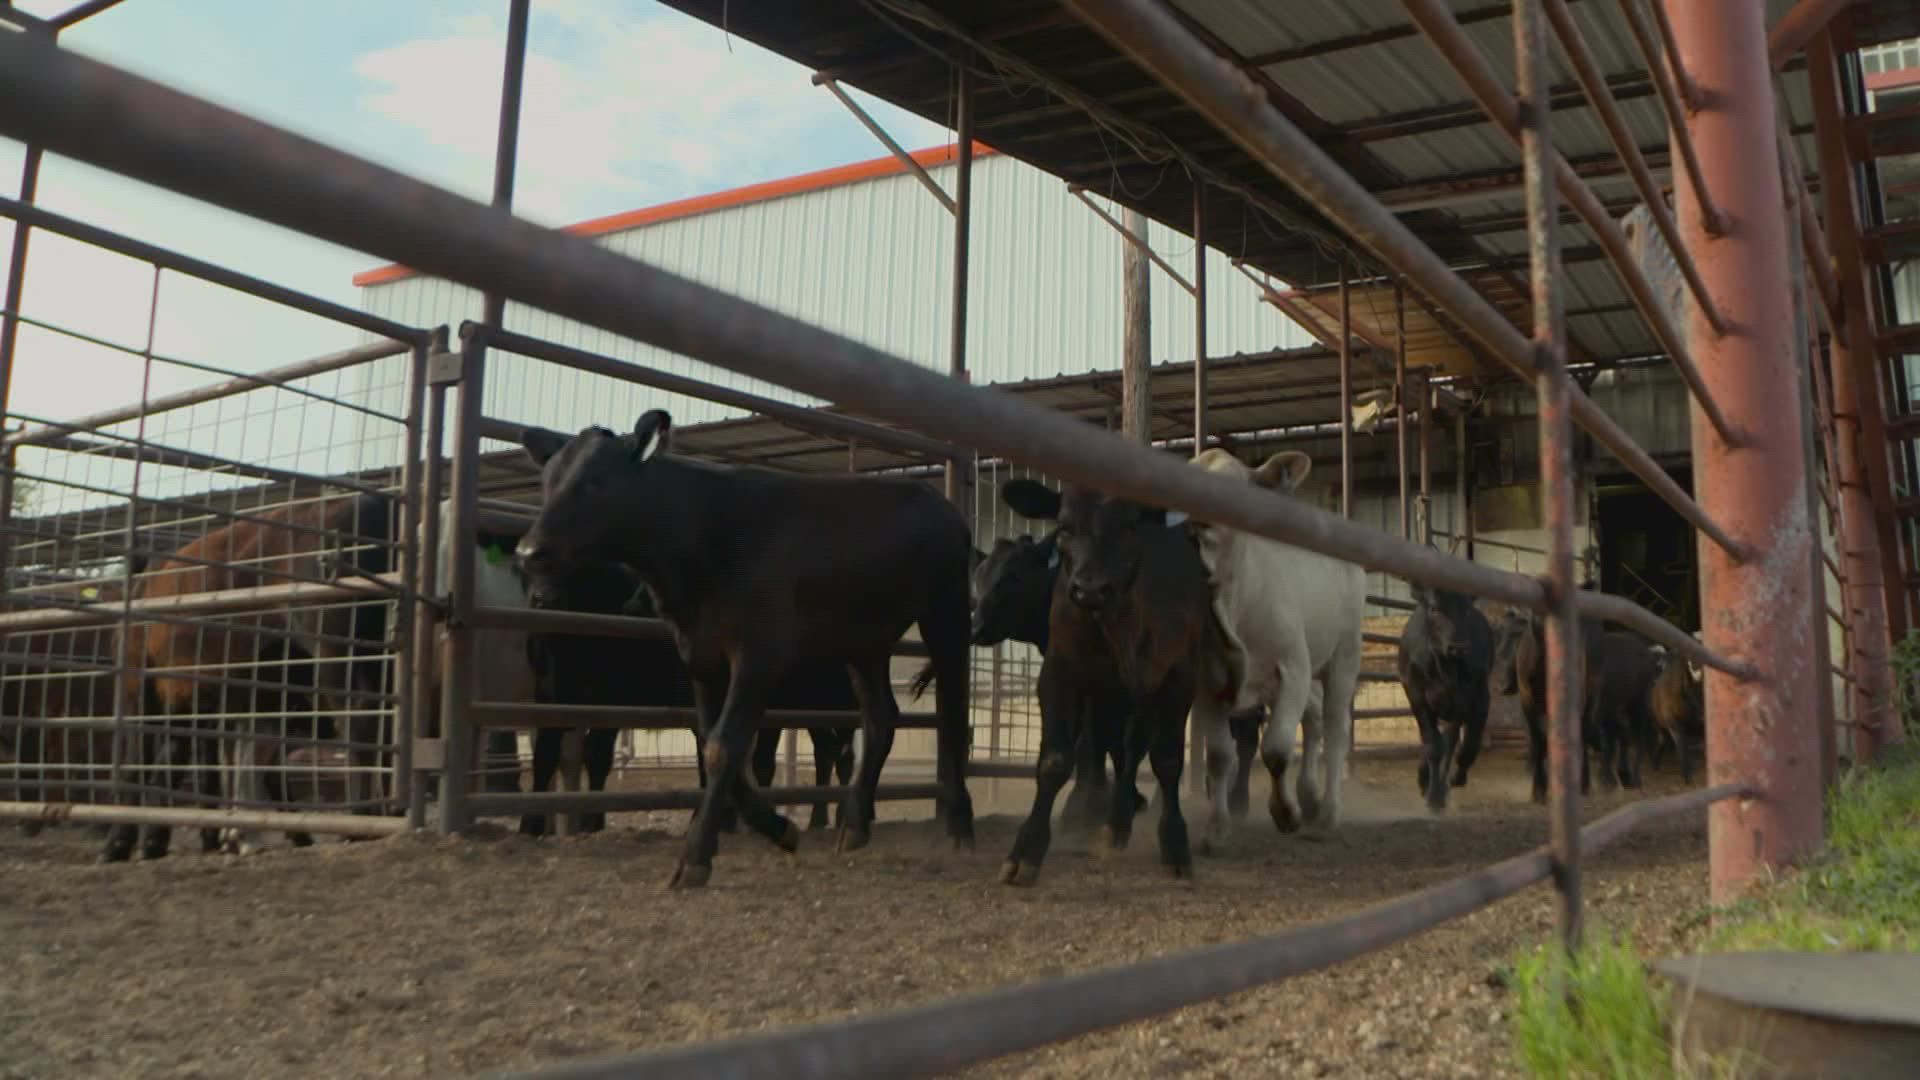 The Decatur Livestock Market saw a 50% increase in the amount of cattle brought in to be sold.